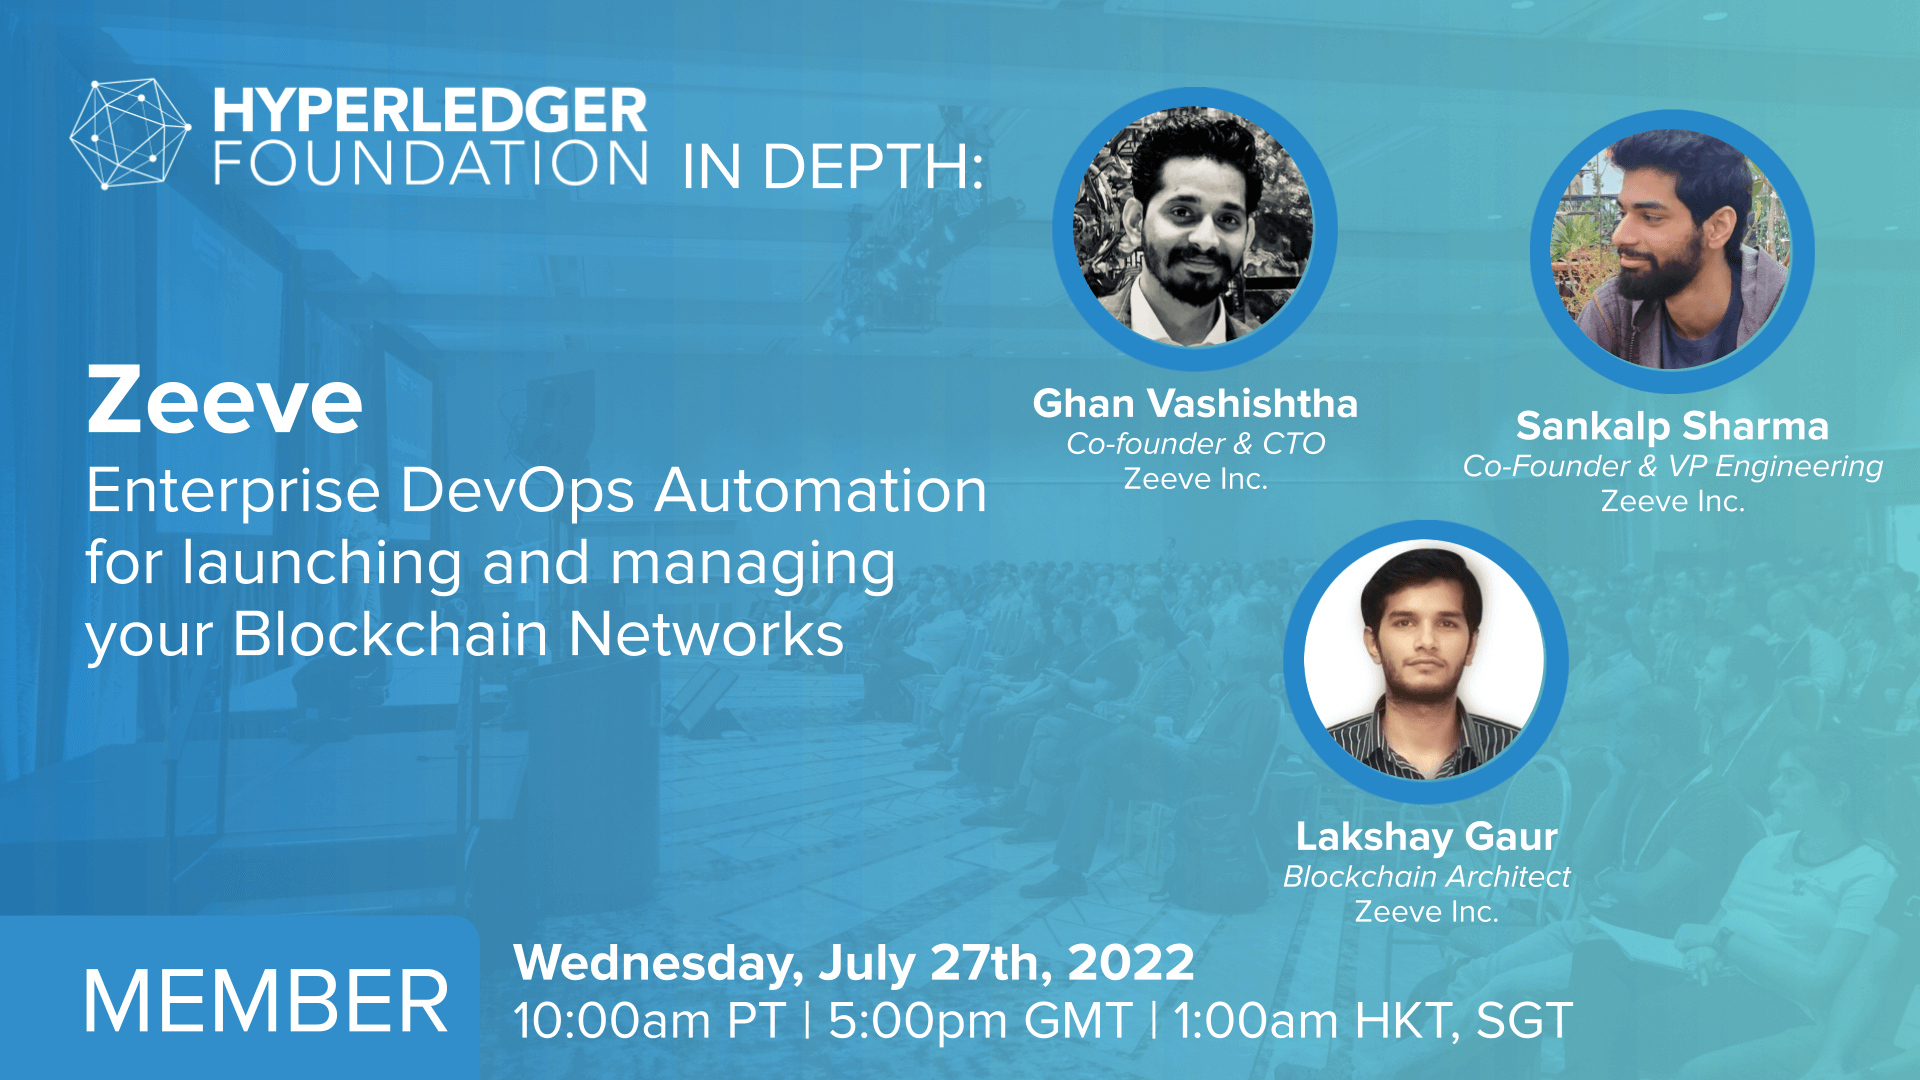 Hyperledger In-depth with Zeeve: Enterprise DevOps Automation for launching and managing your Blockchain Networks